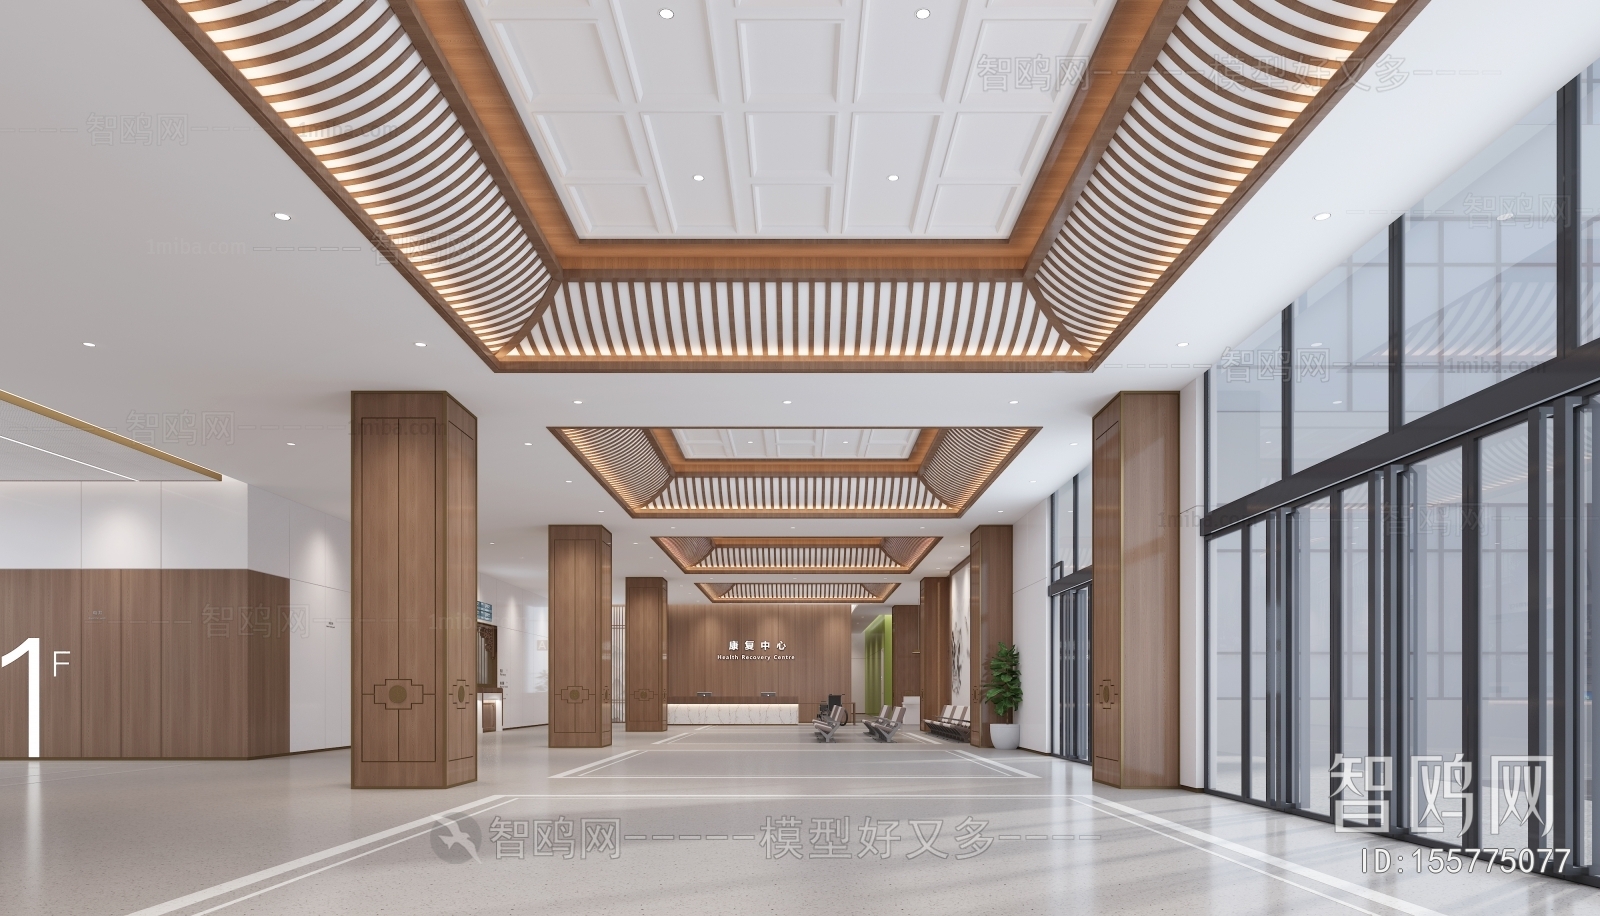 New Chinese Style Hospital Hall